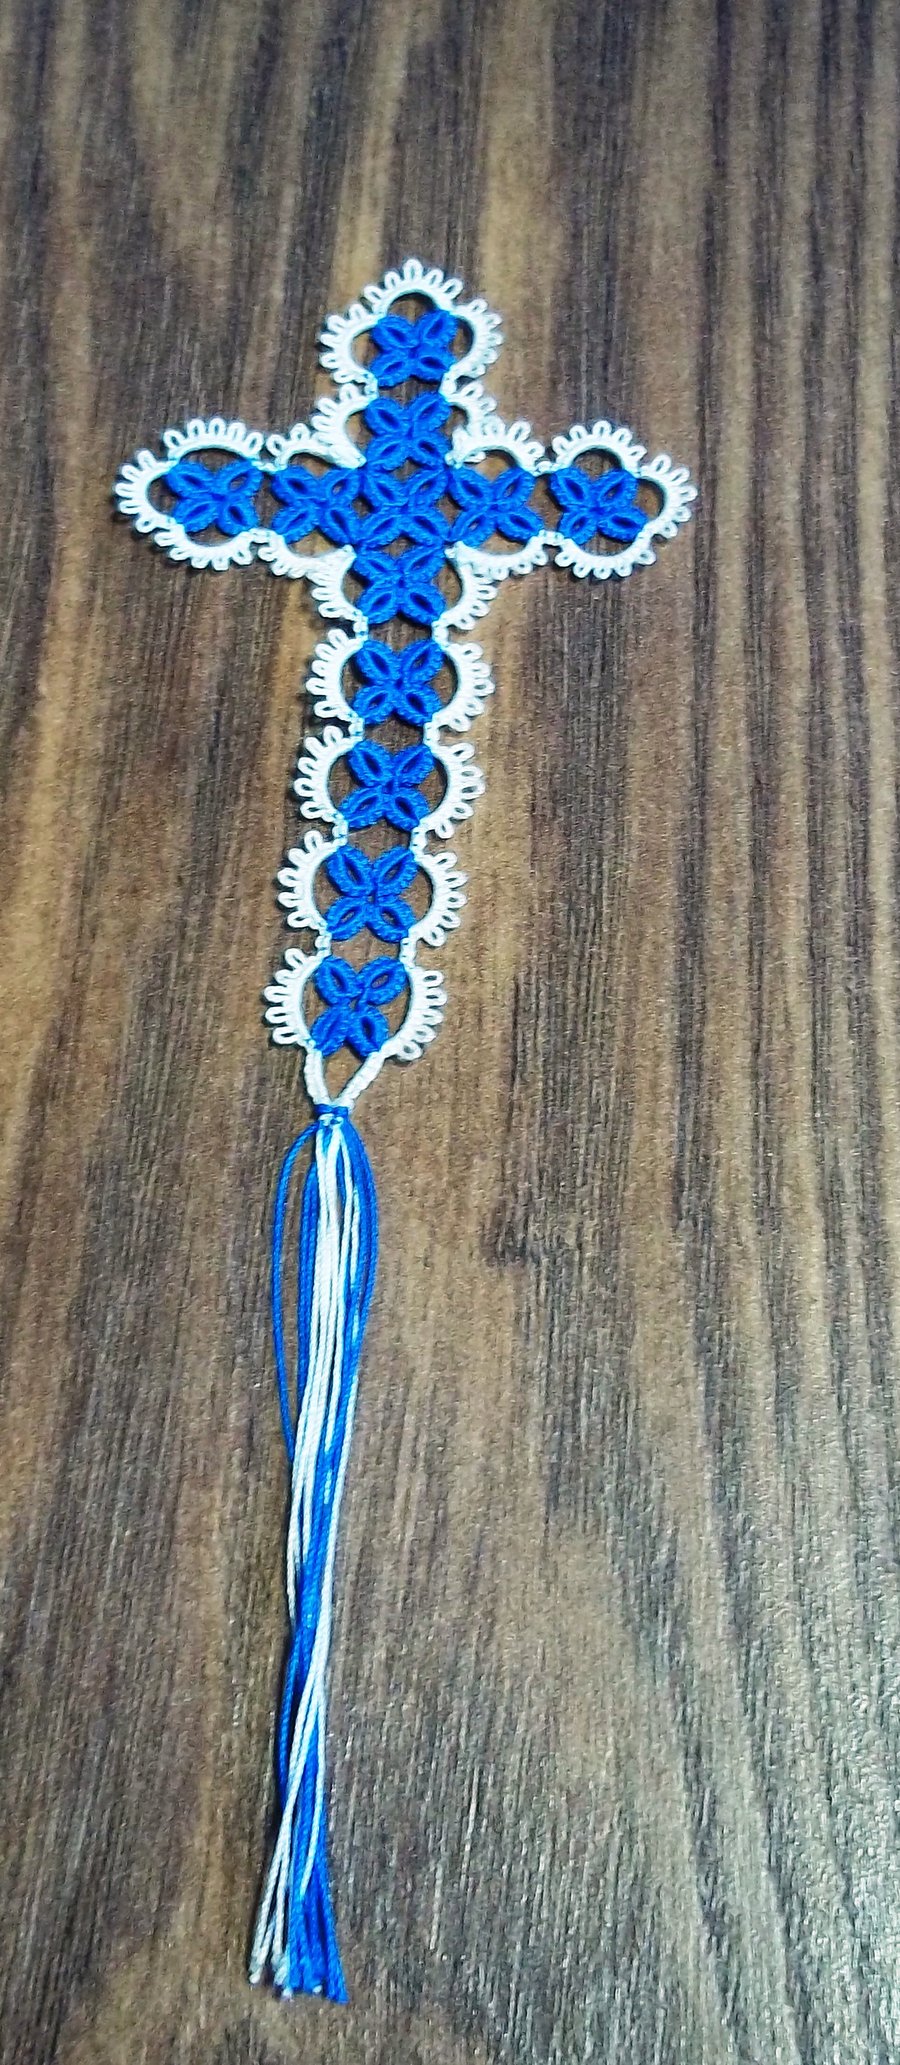 Cream and Blue Tatted Cross Bookmark